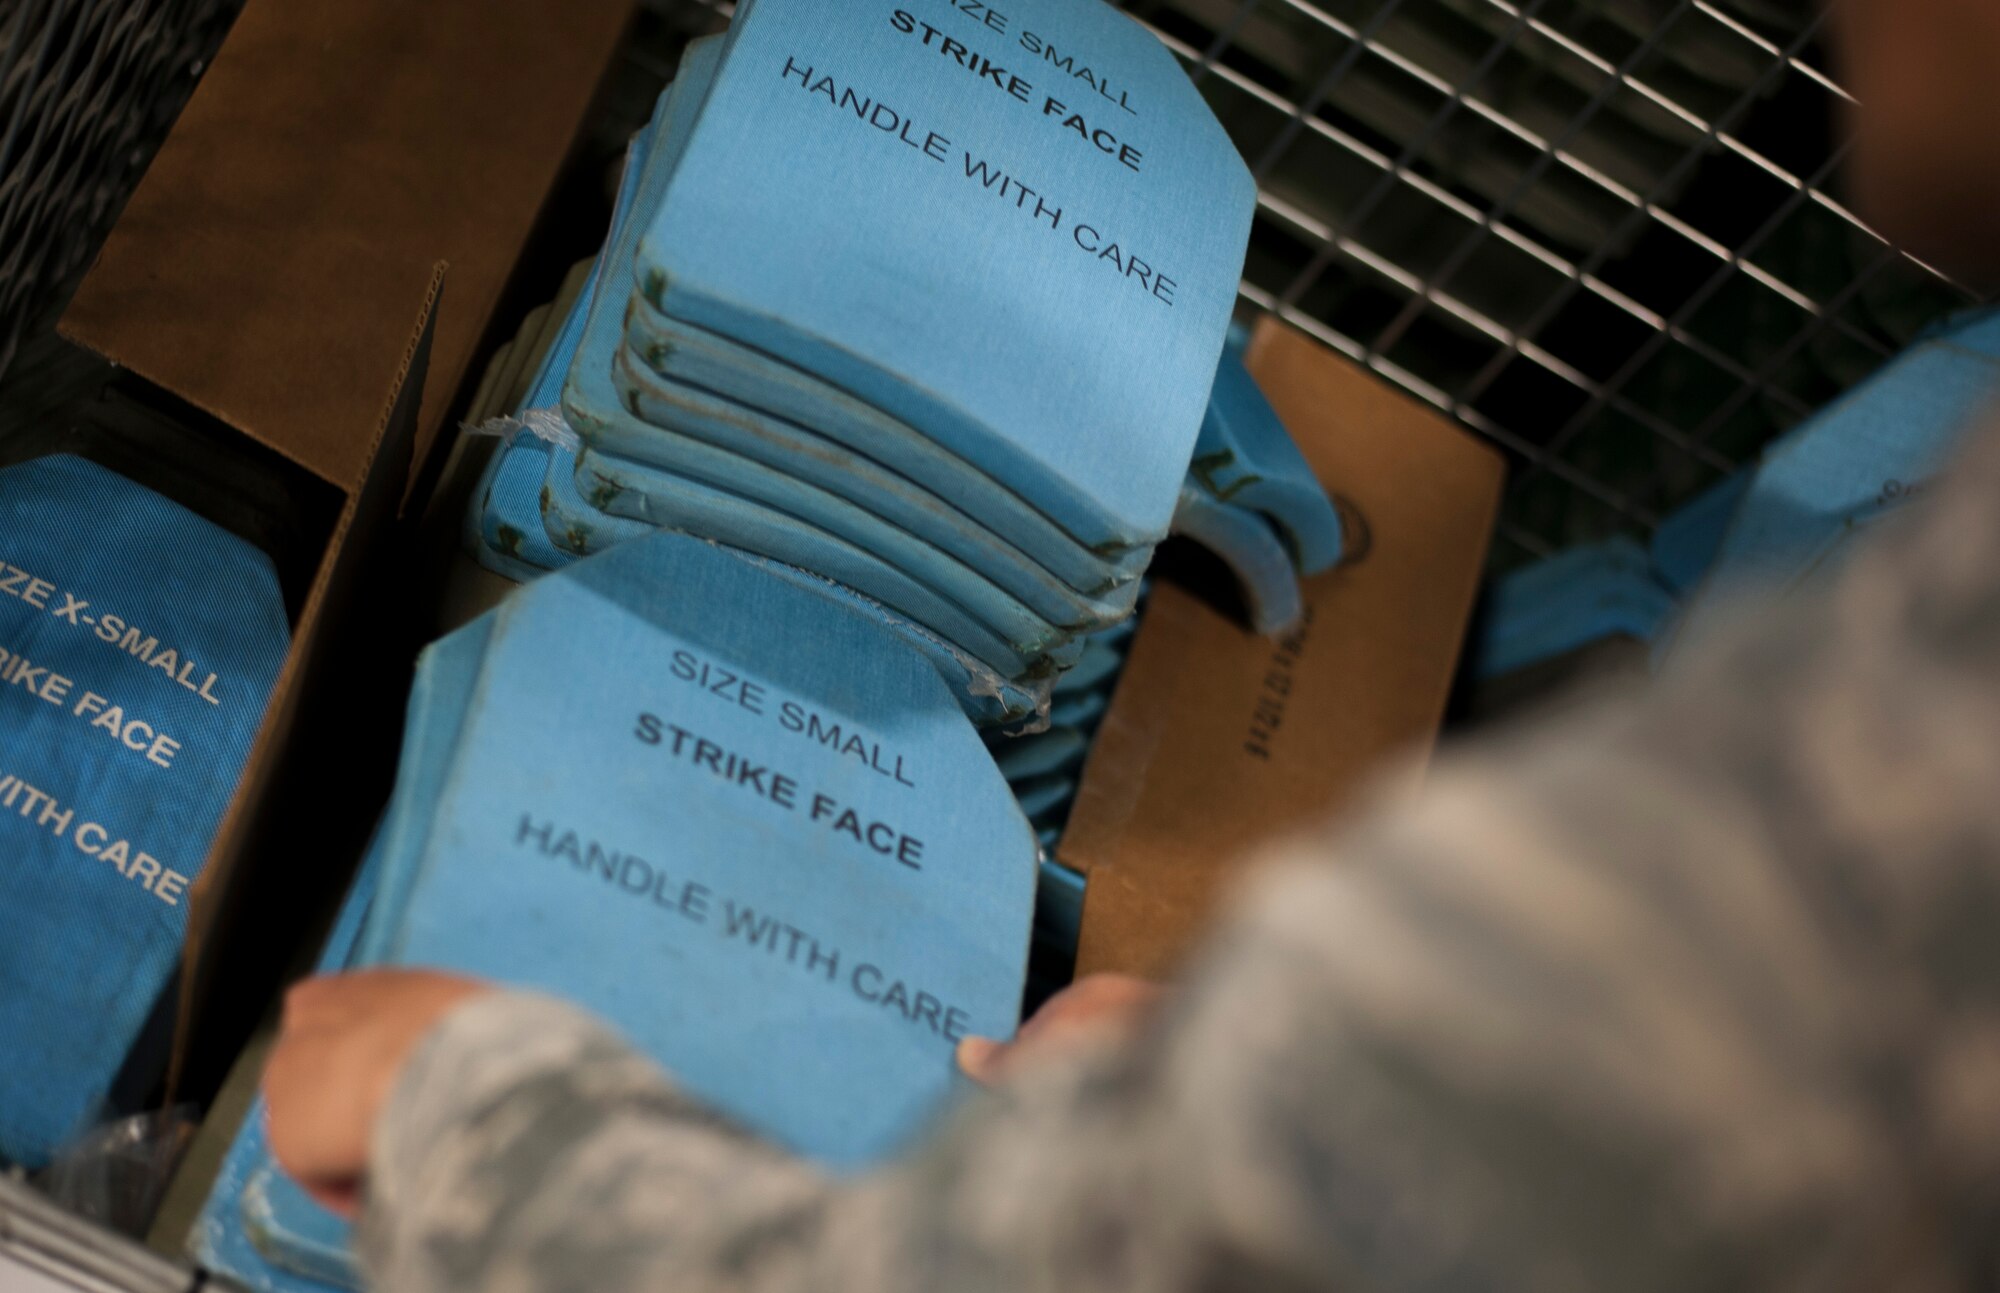 U.S. Air Force Airman 1st Class Gantuya Larkins, an individual protective equipment (IPE) technician assigned to the 6th Logistics Readiness Squadron, performs an inventory check on vest plates at MacDill Air Force Base, Fla., Dec. 28, 2017.